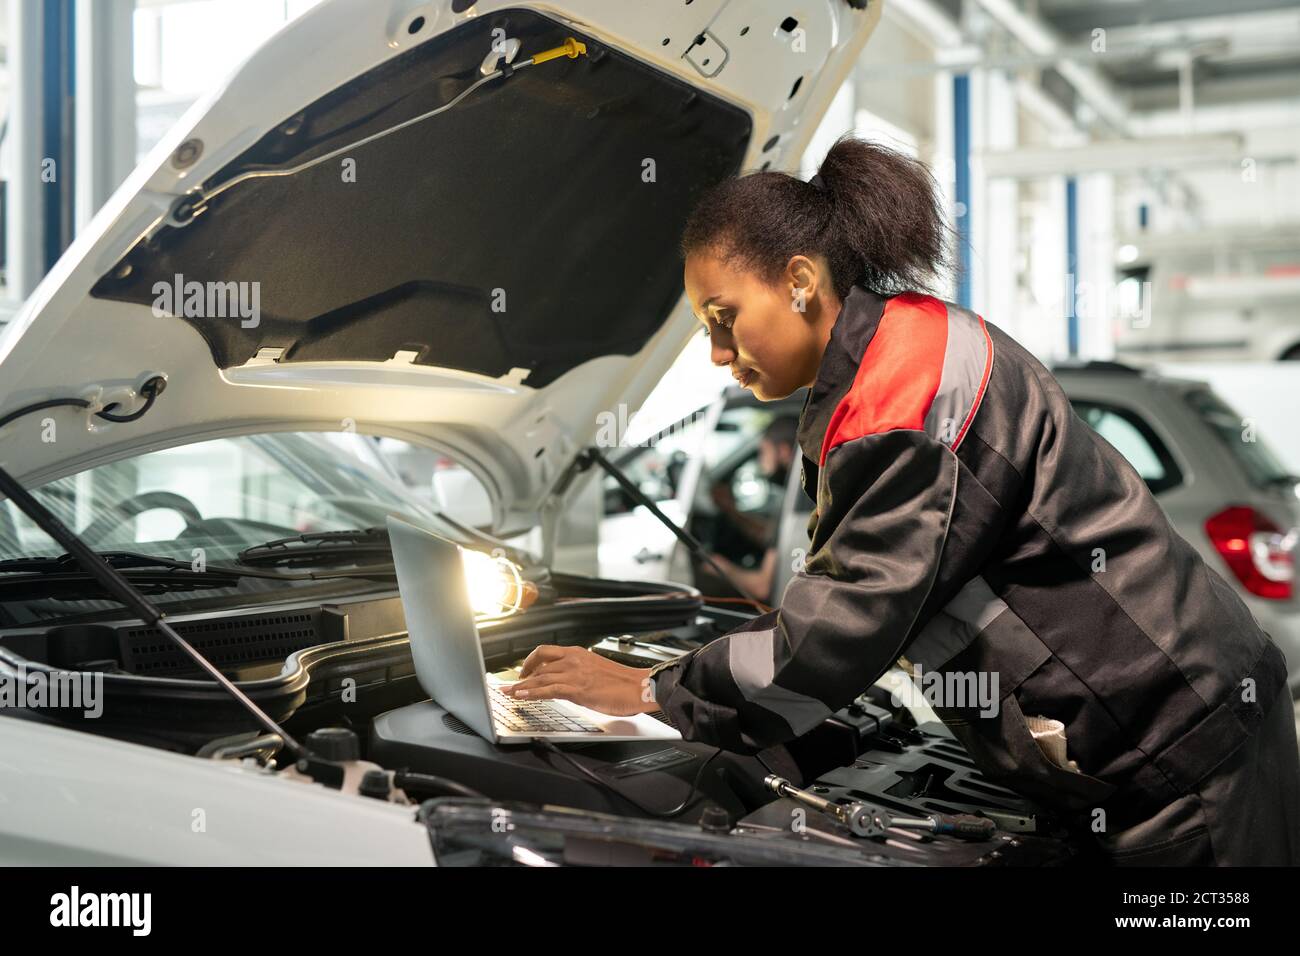 Young worker of car maintenance service bending over open engine compartment Stock Photo